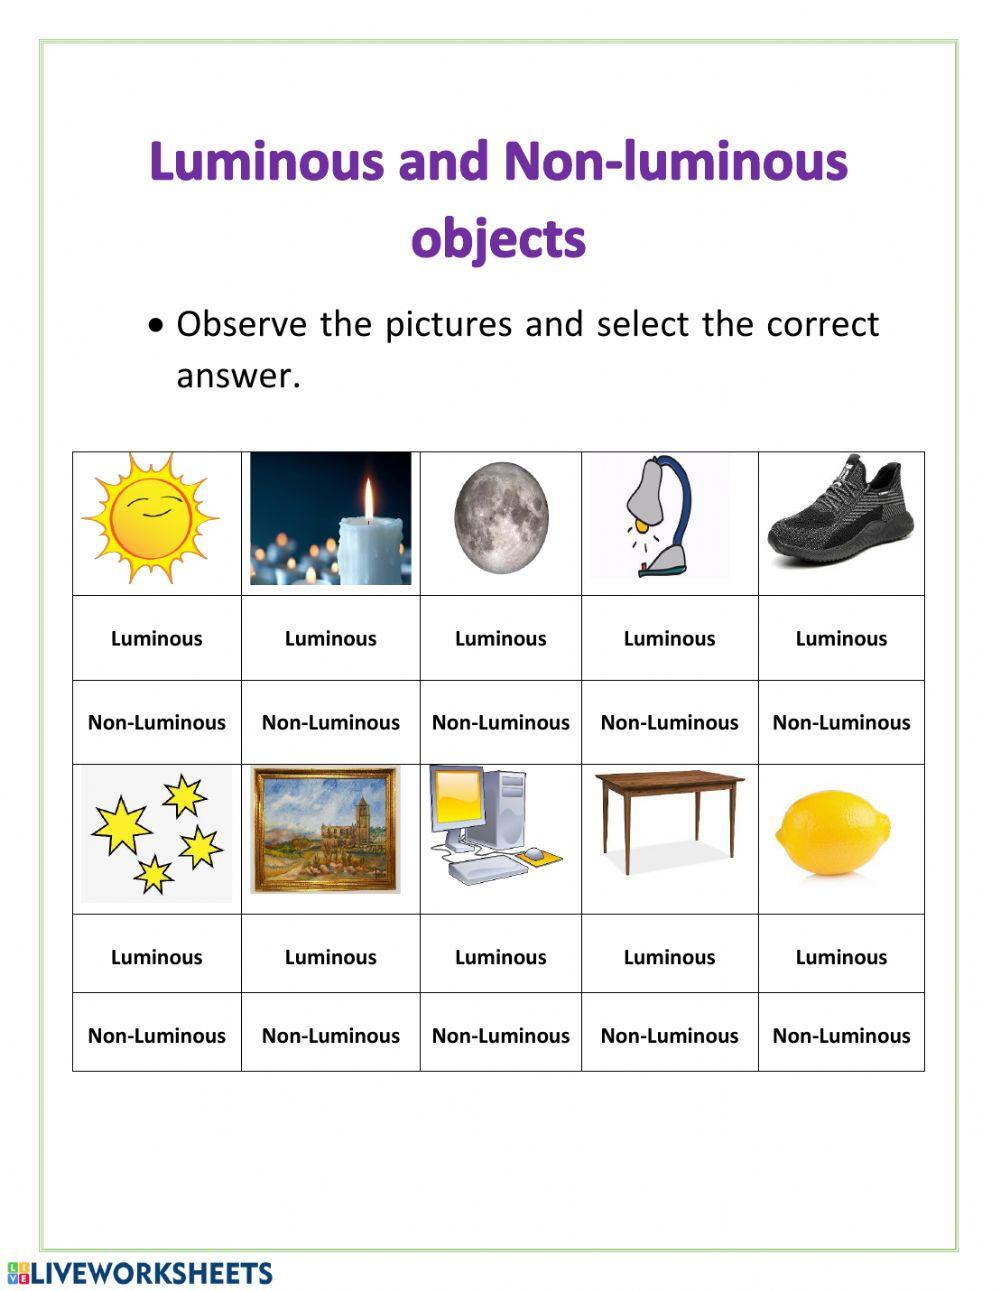 Luminous and Non luminous objects online exercise for | Live Worksheets